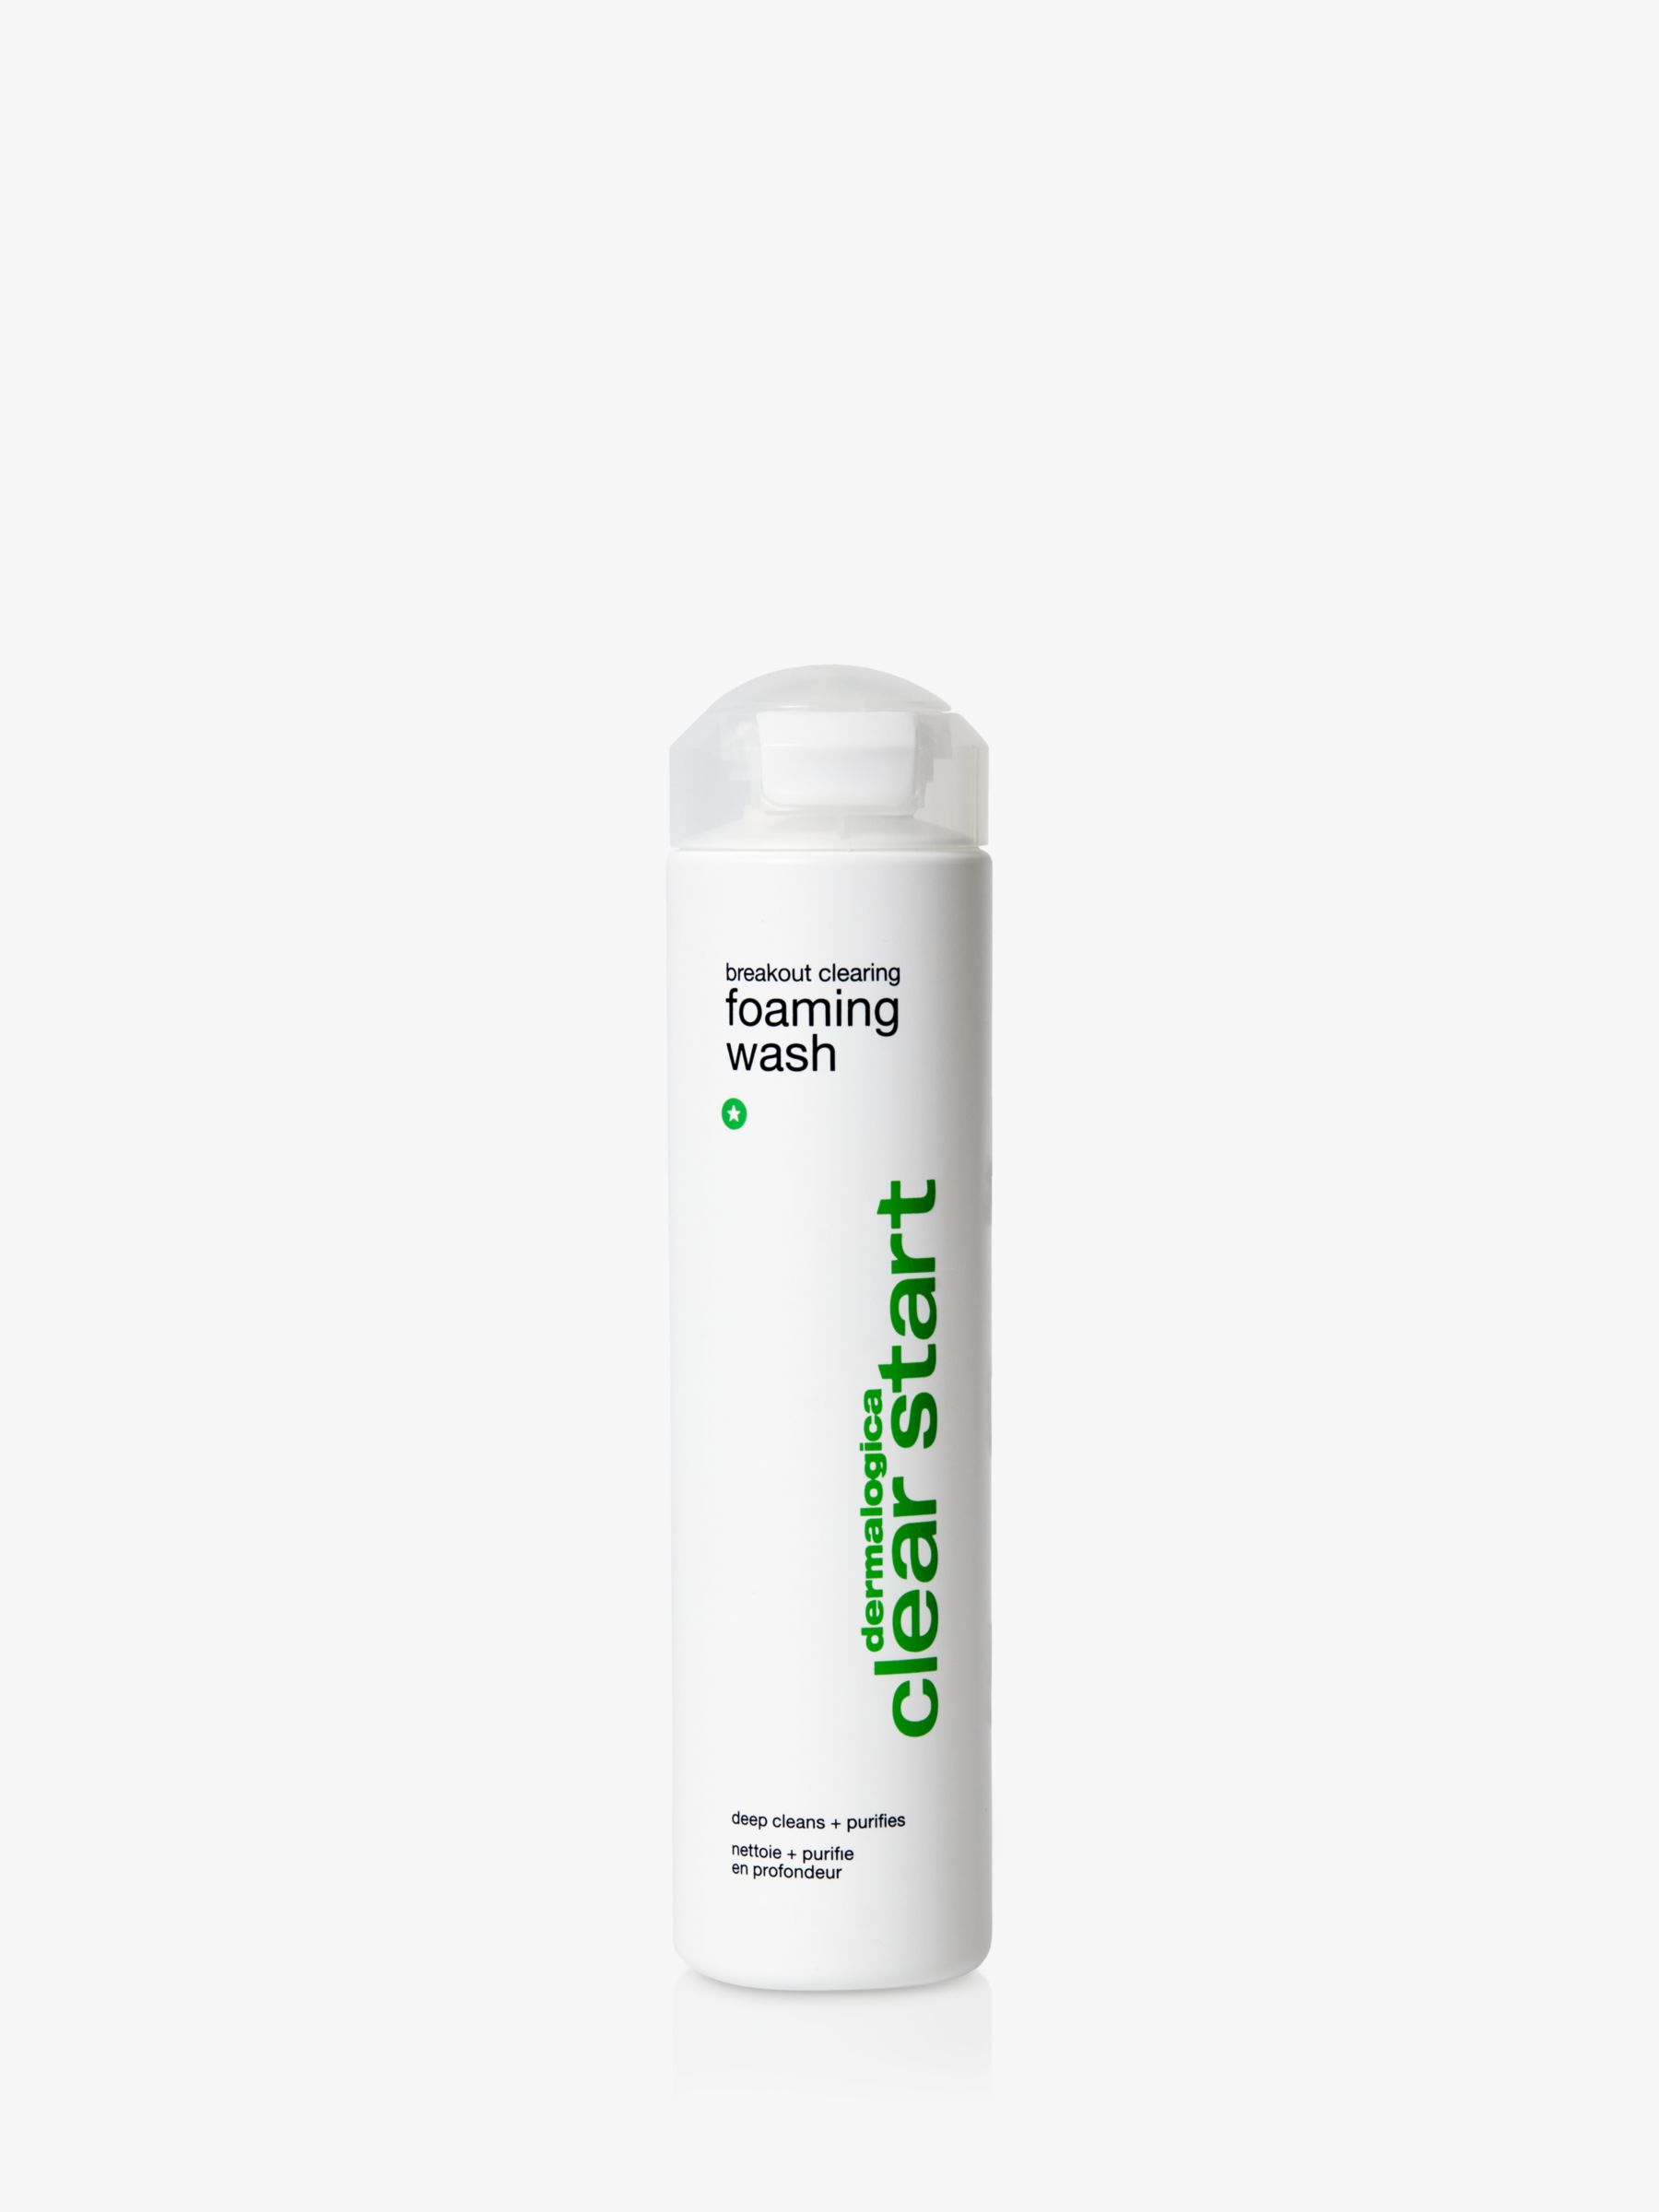 Dermalogica Clear Clearing Foaming Wash, 177ml at John Lewis